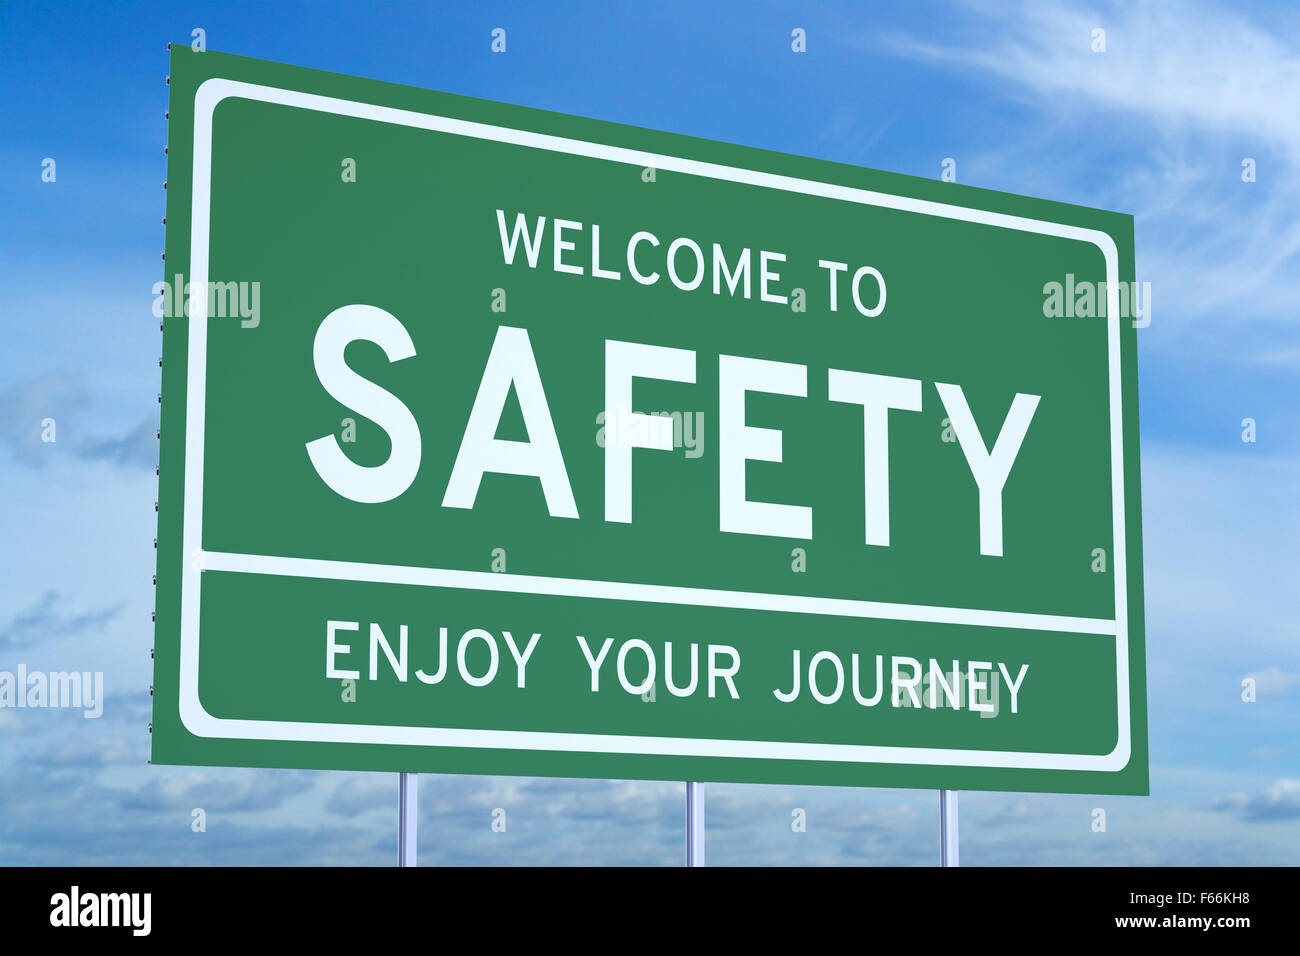 Welcome to Safety concept on road billboard Stock Photo